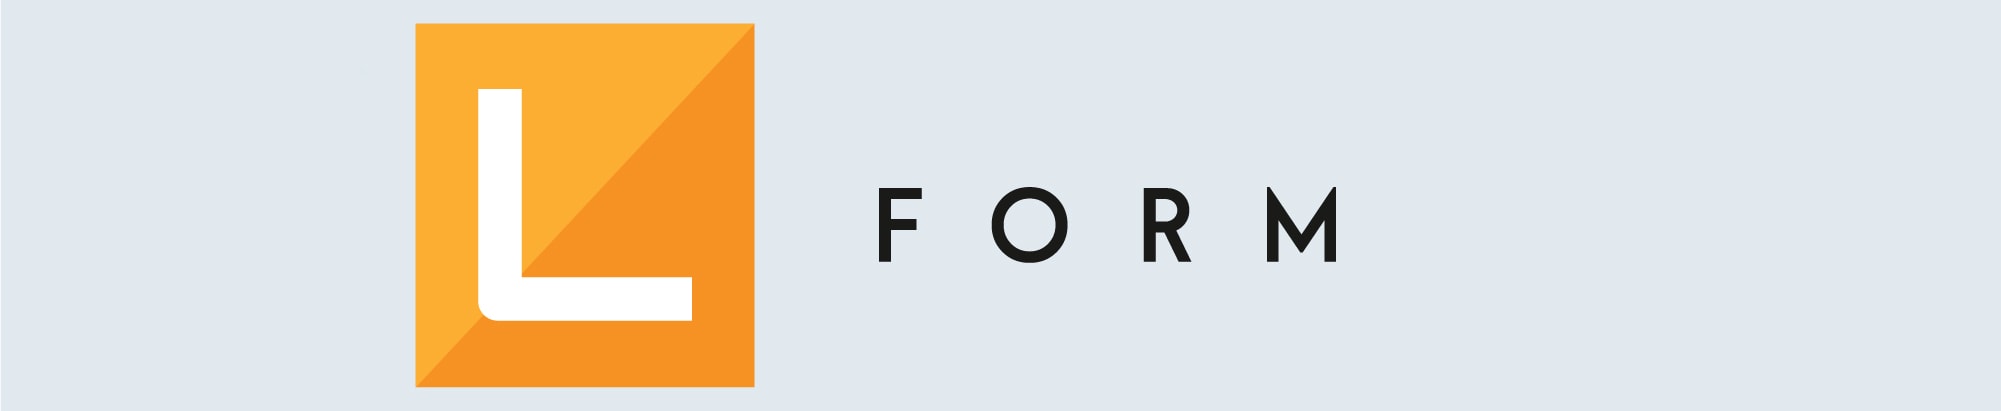 Lform Design as the most wanted website development company in New Jersey